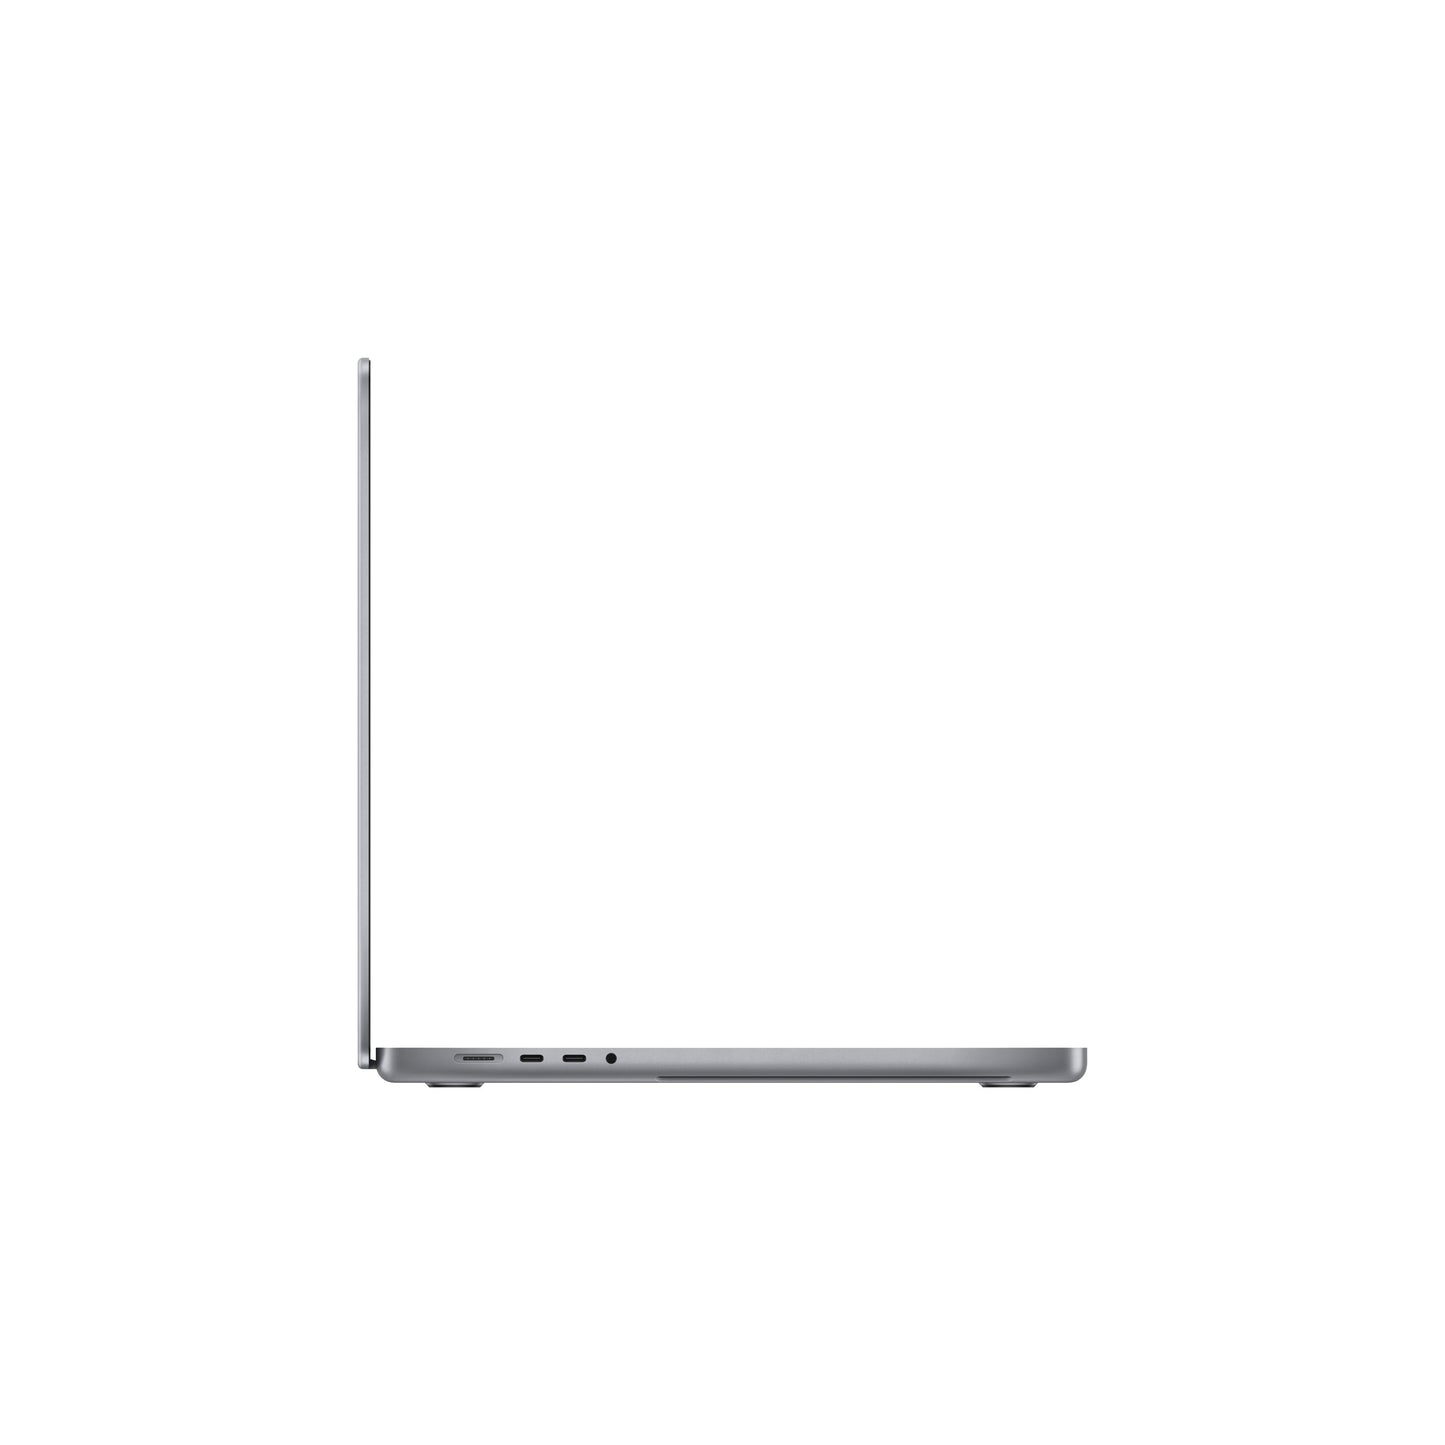 Pre-owned 16-inch MacBook Pro M1 Pro 16GB / 512GB - Space Gray (2021 model)